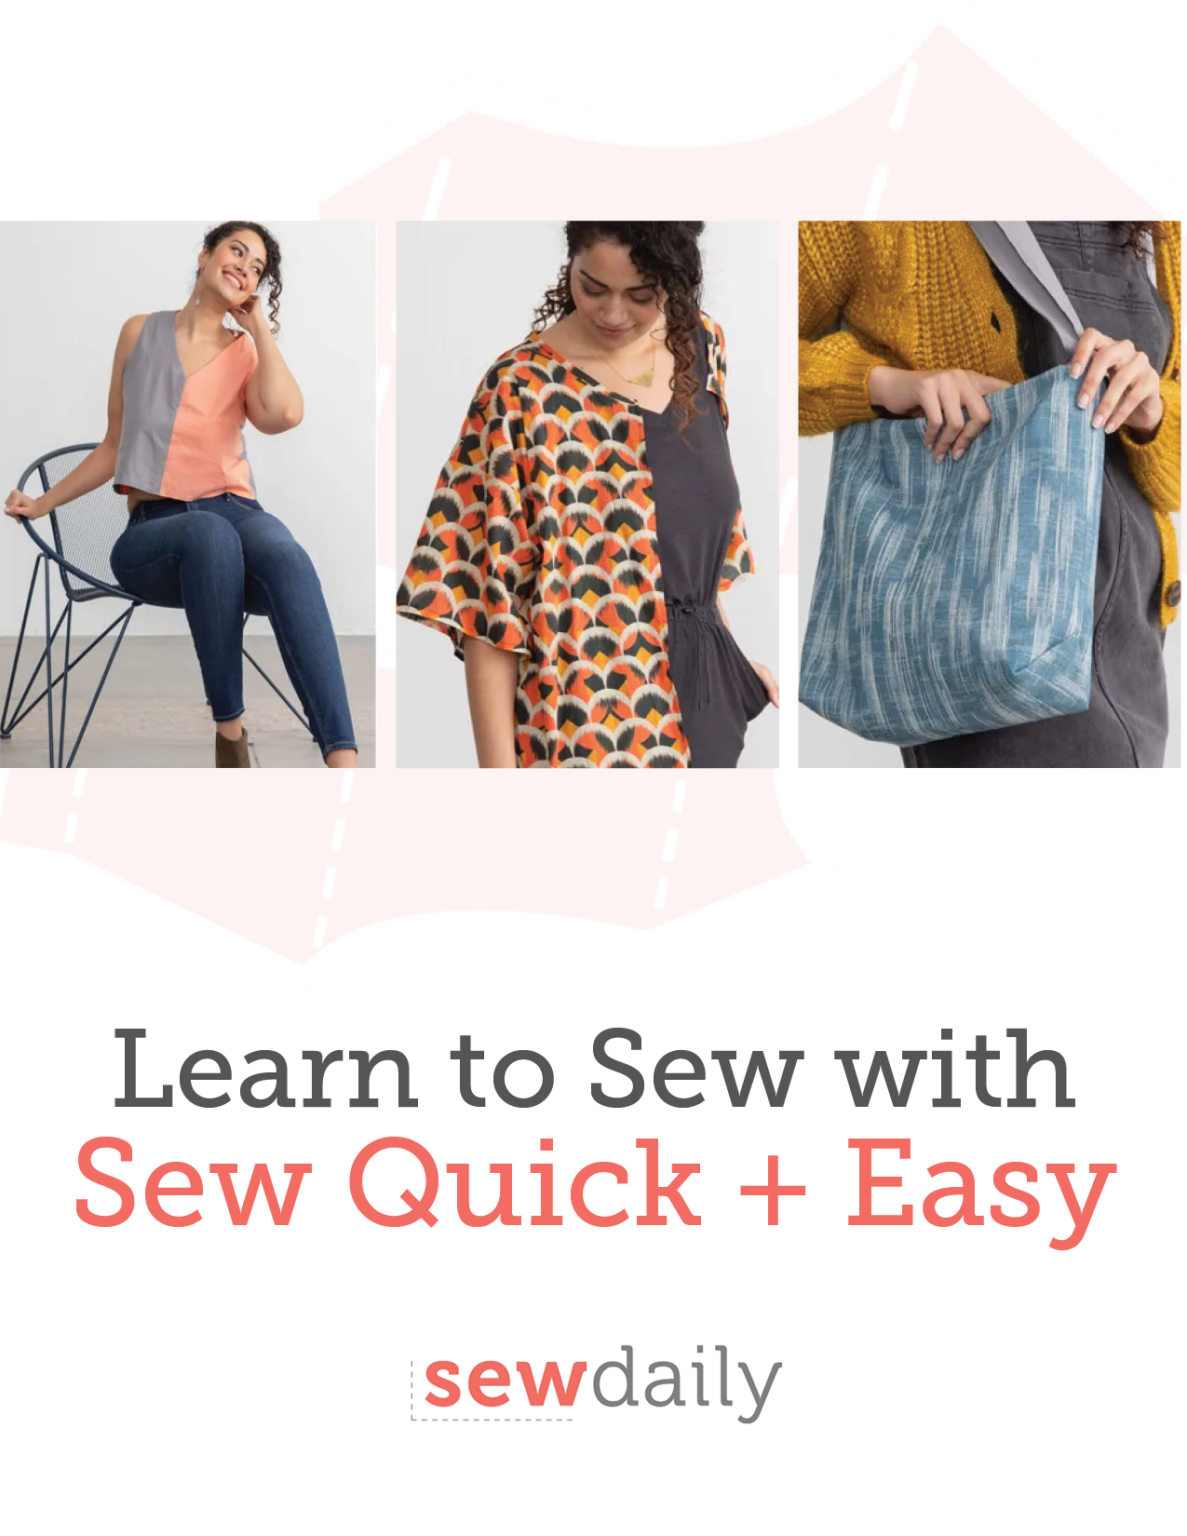 Learn to Sew with Sew Quick + Easy - Sew Daily